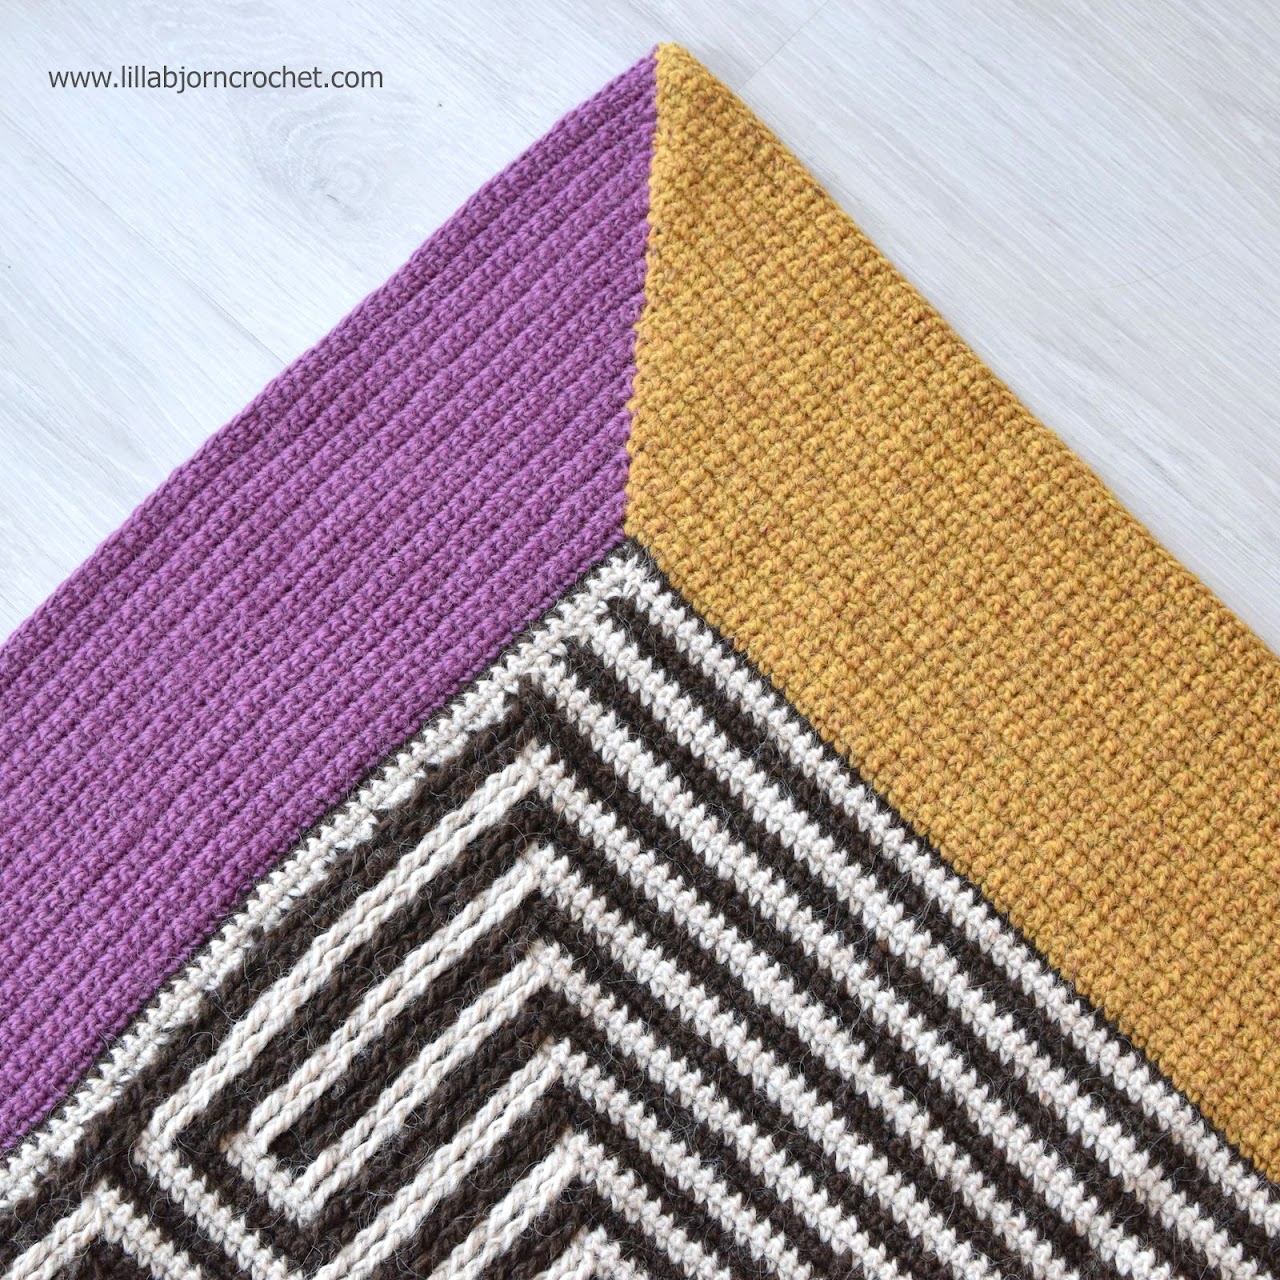 Roman Labyrinth pattern is written for both a rug and a pillow. Overlay crochet design by www.lillabjorncrochet.com